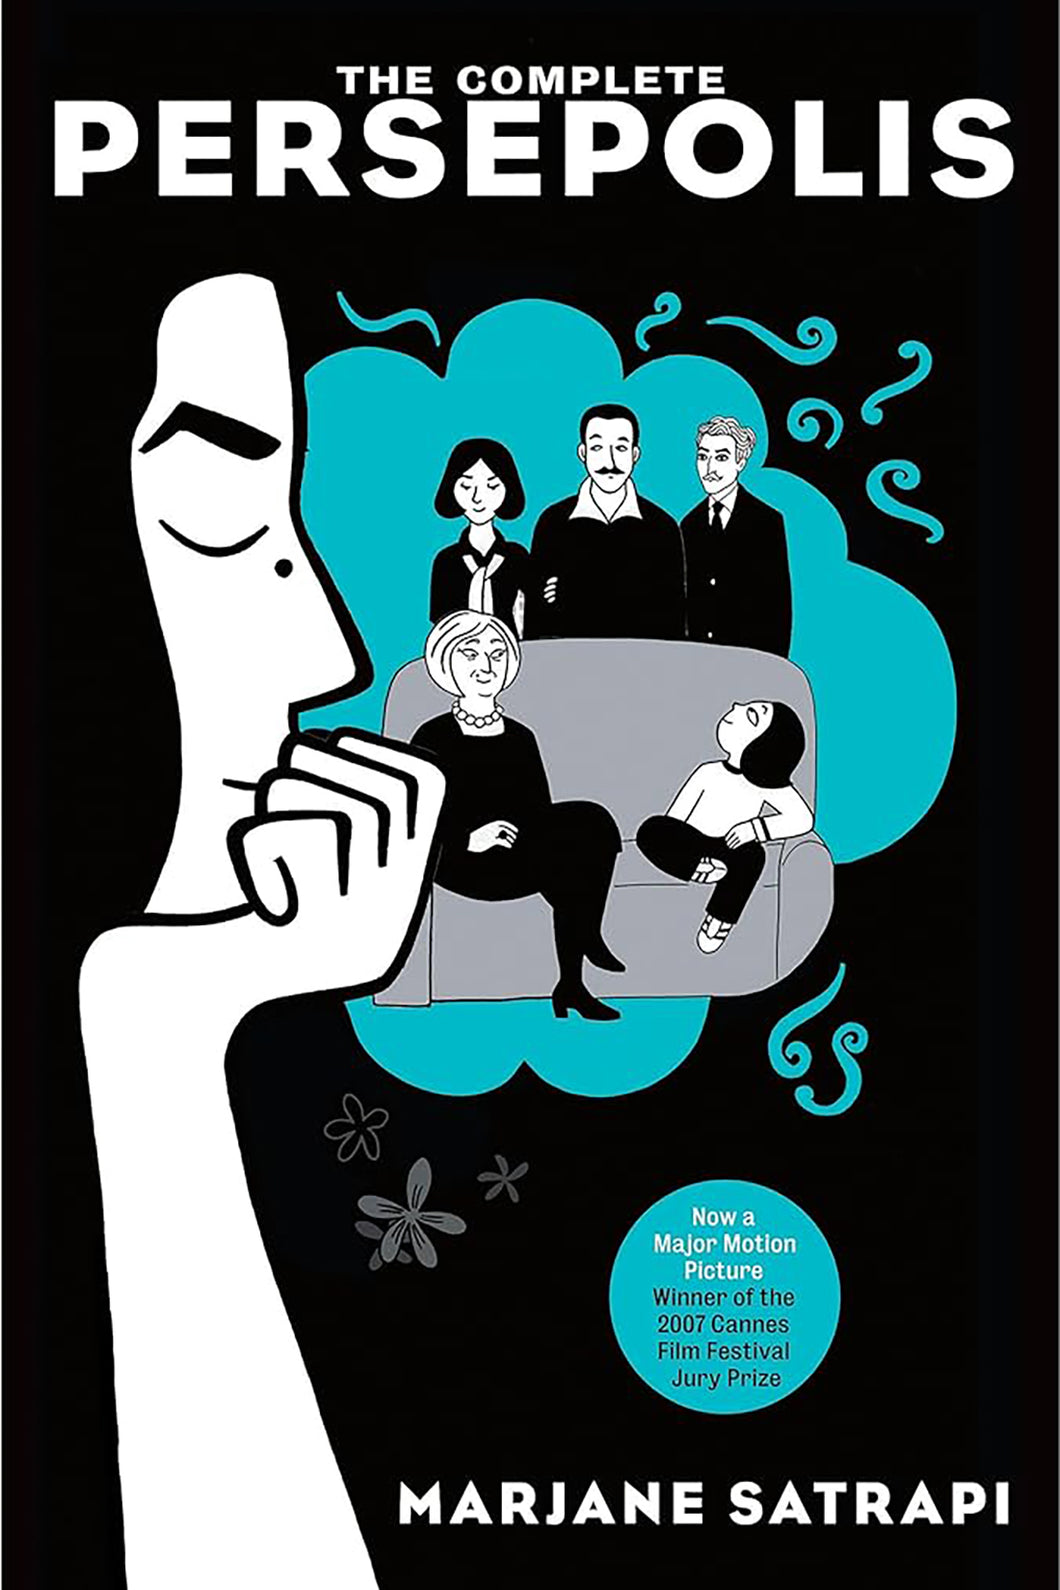 The Complete Persepolis: Volumes 1 and 2 by Marjane Satrapi / BOOK OR BUNDLE - Starting at $27!